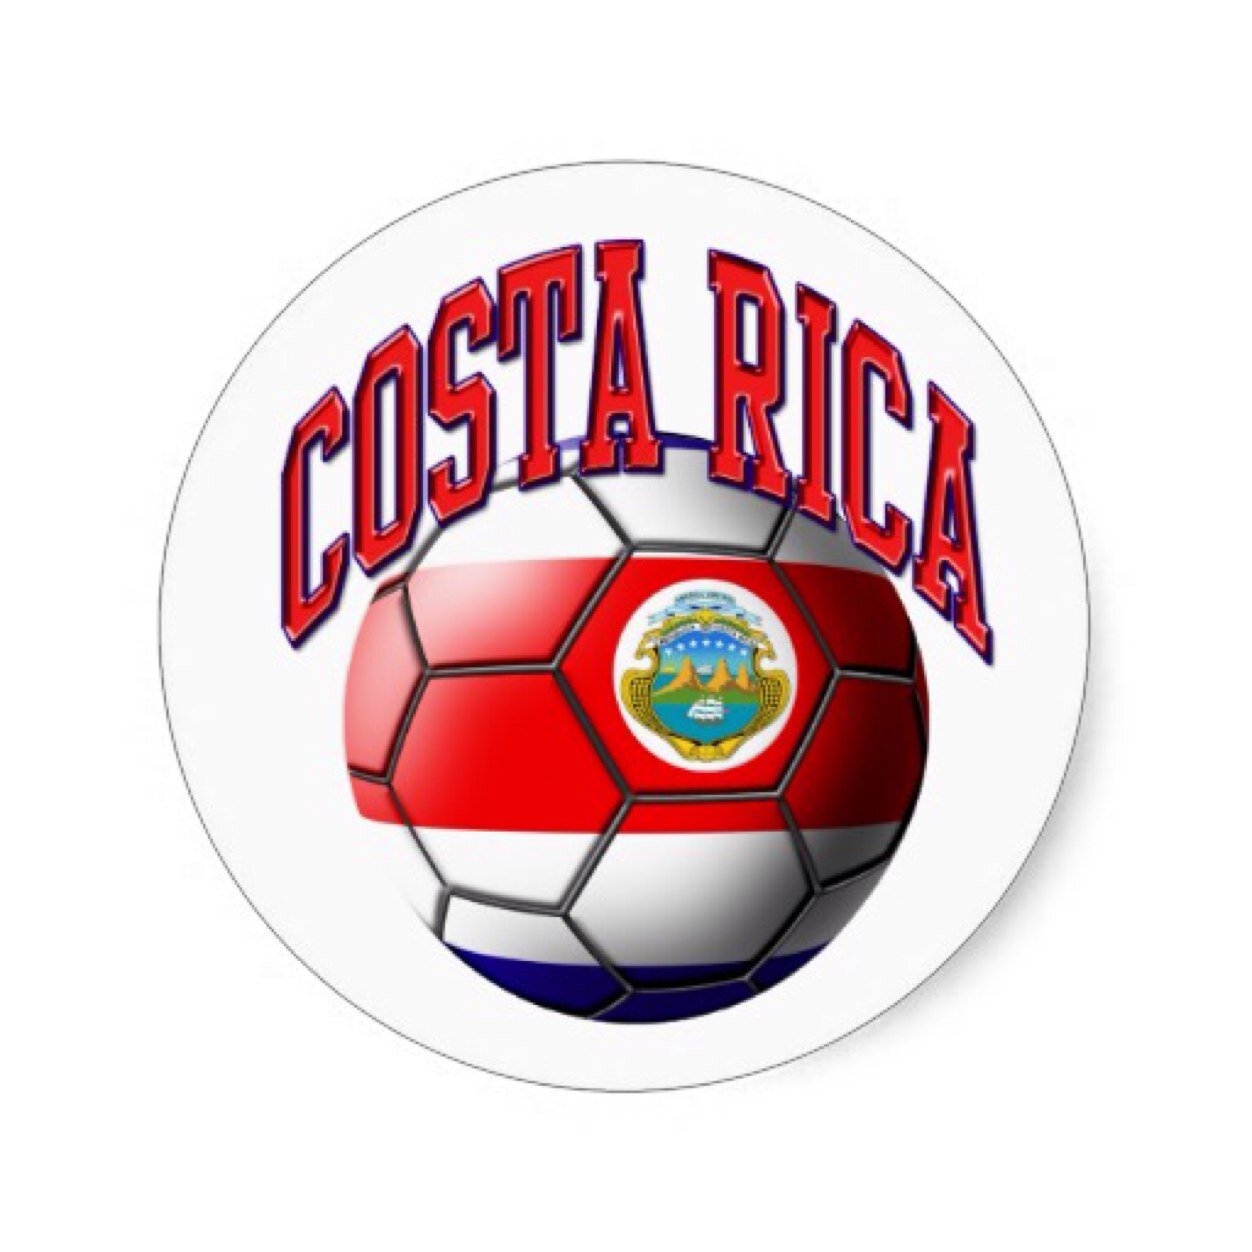 Directly from Costa Rica, we bring the best tweets related the U-17 Women's Soccer World Cup in March 2014. This is an unofficial site of the event !